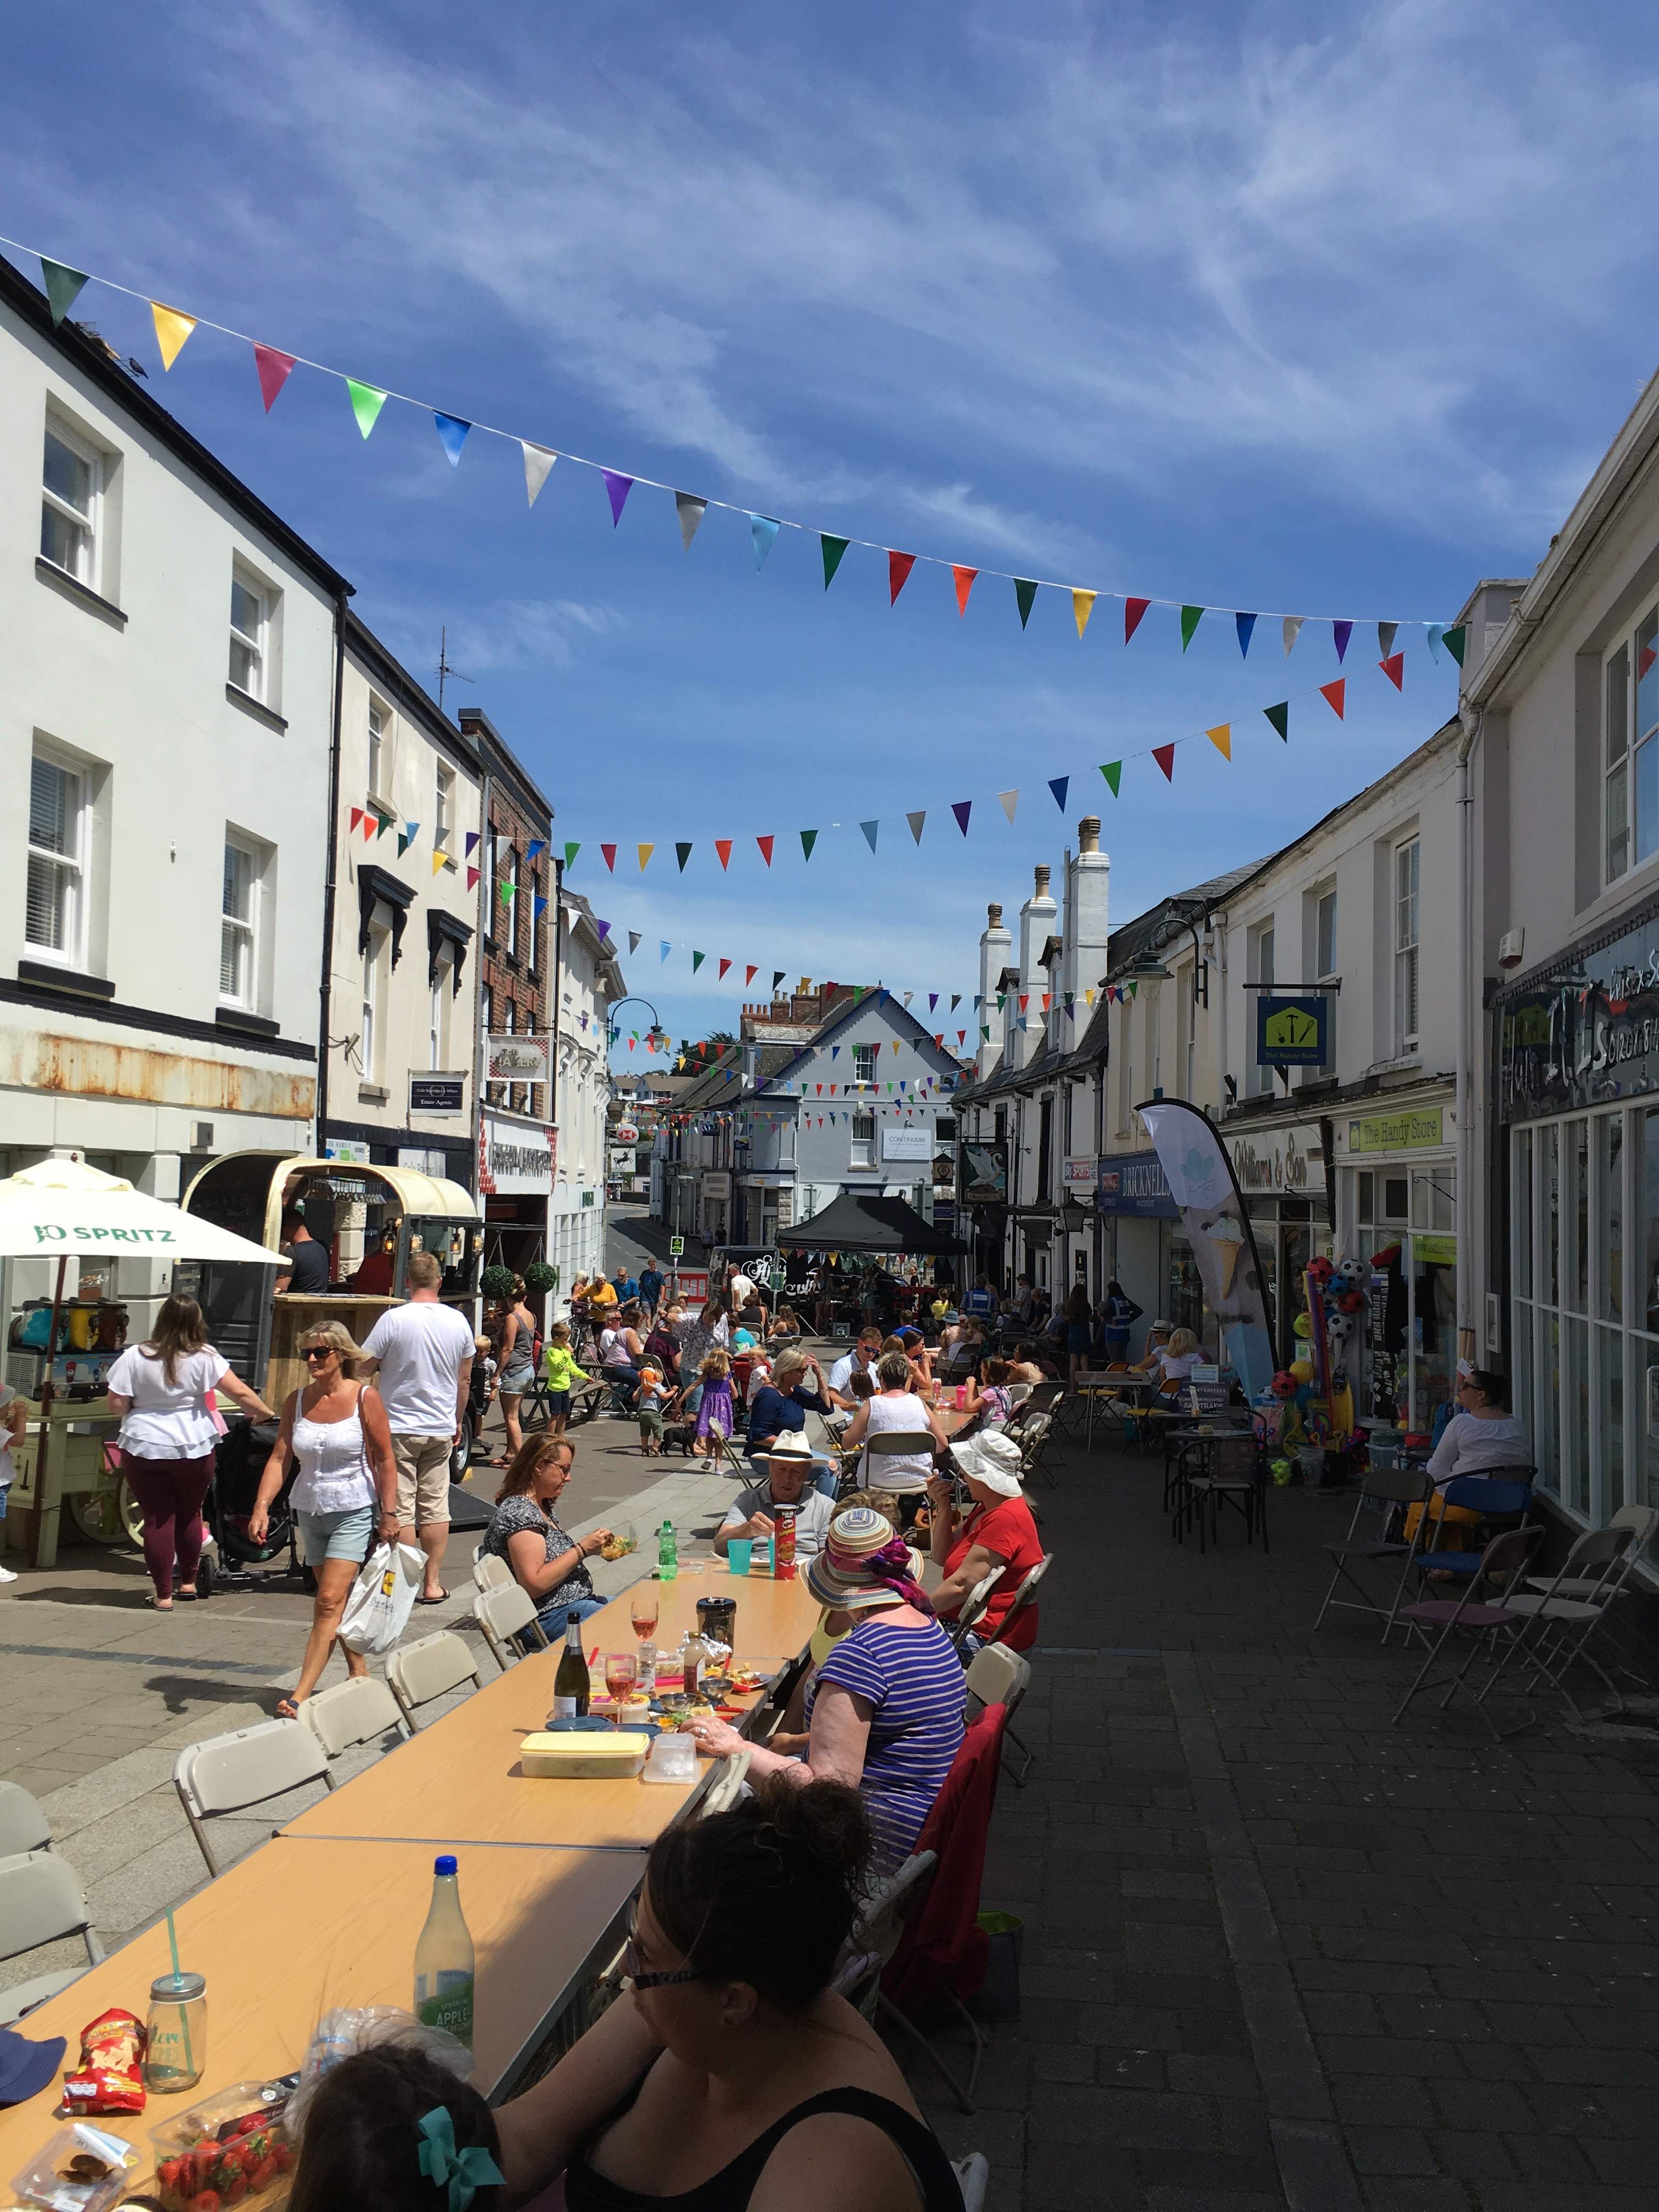 Pull up a chair and join the street party in June